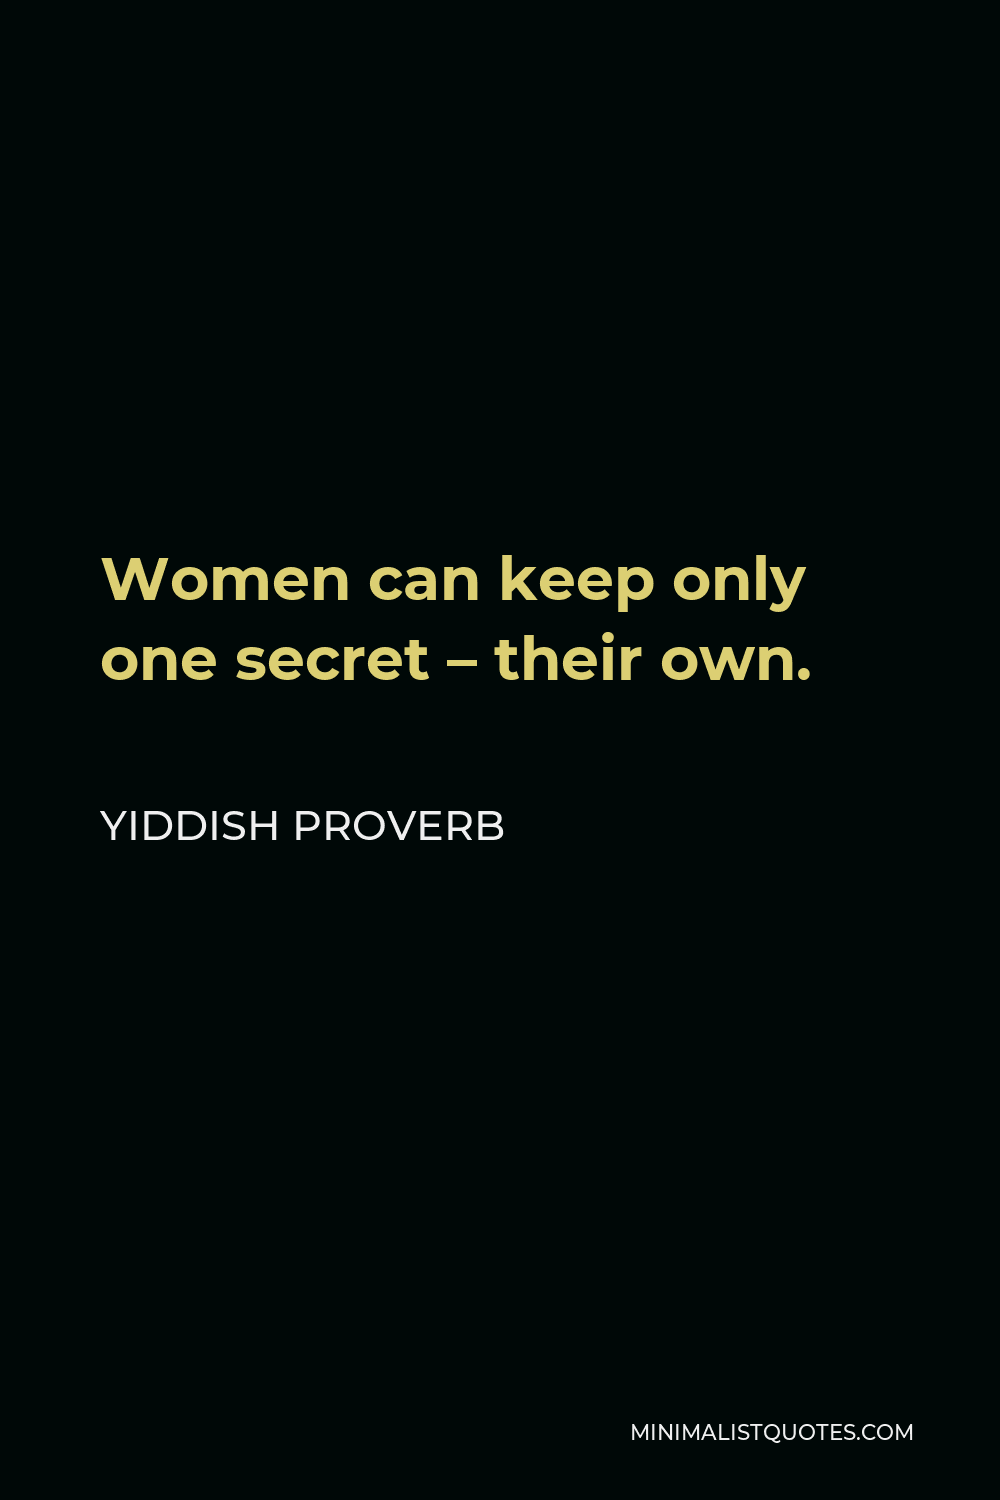 Yiddish Proverb Quote - Women can keep only one secret – their own.